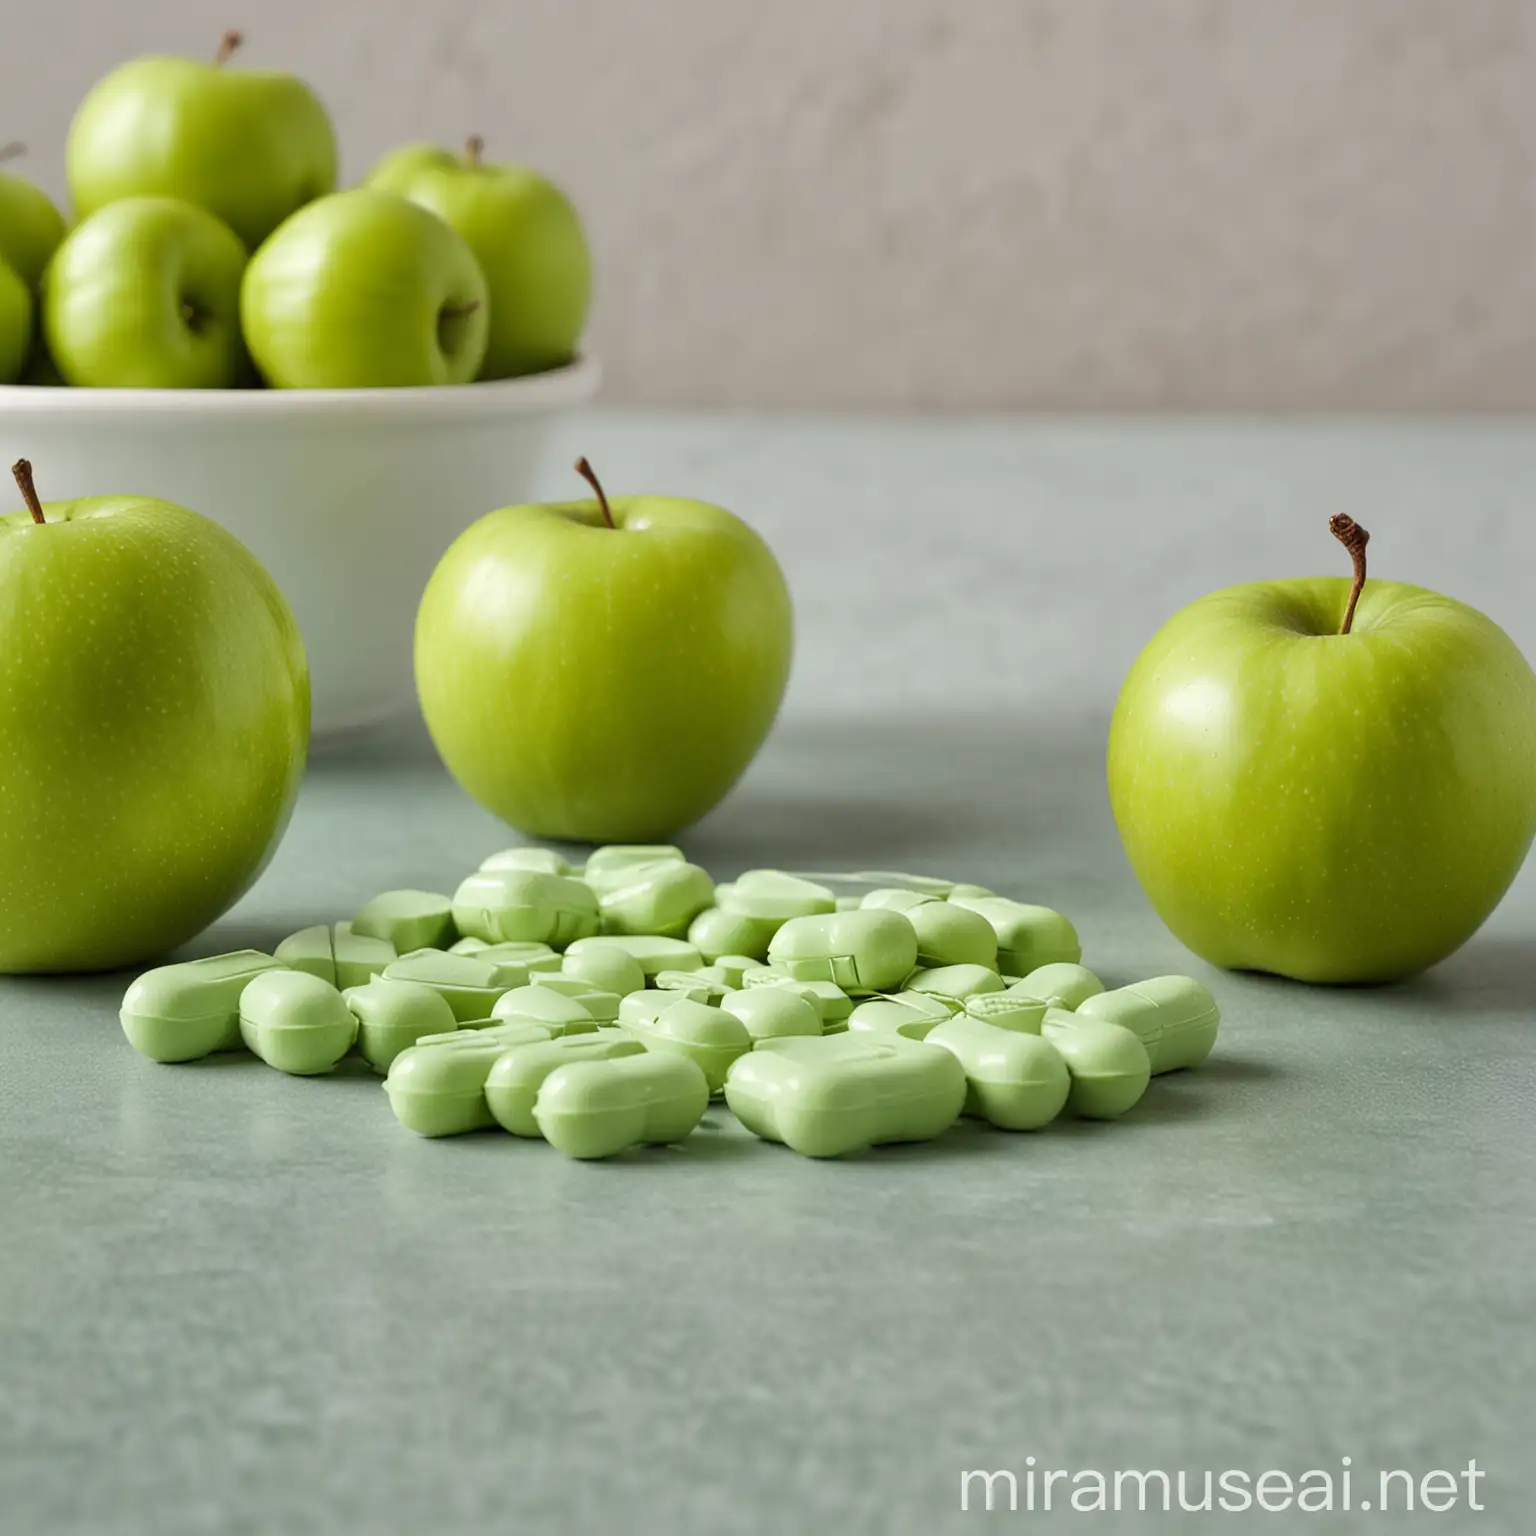 Green Pharmaceutical Tablets Next to Fresh Green Apples